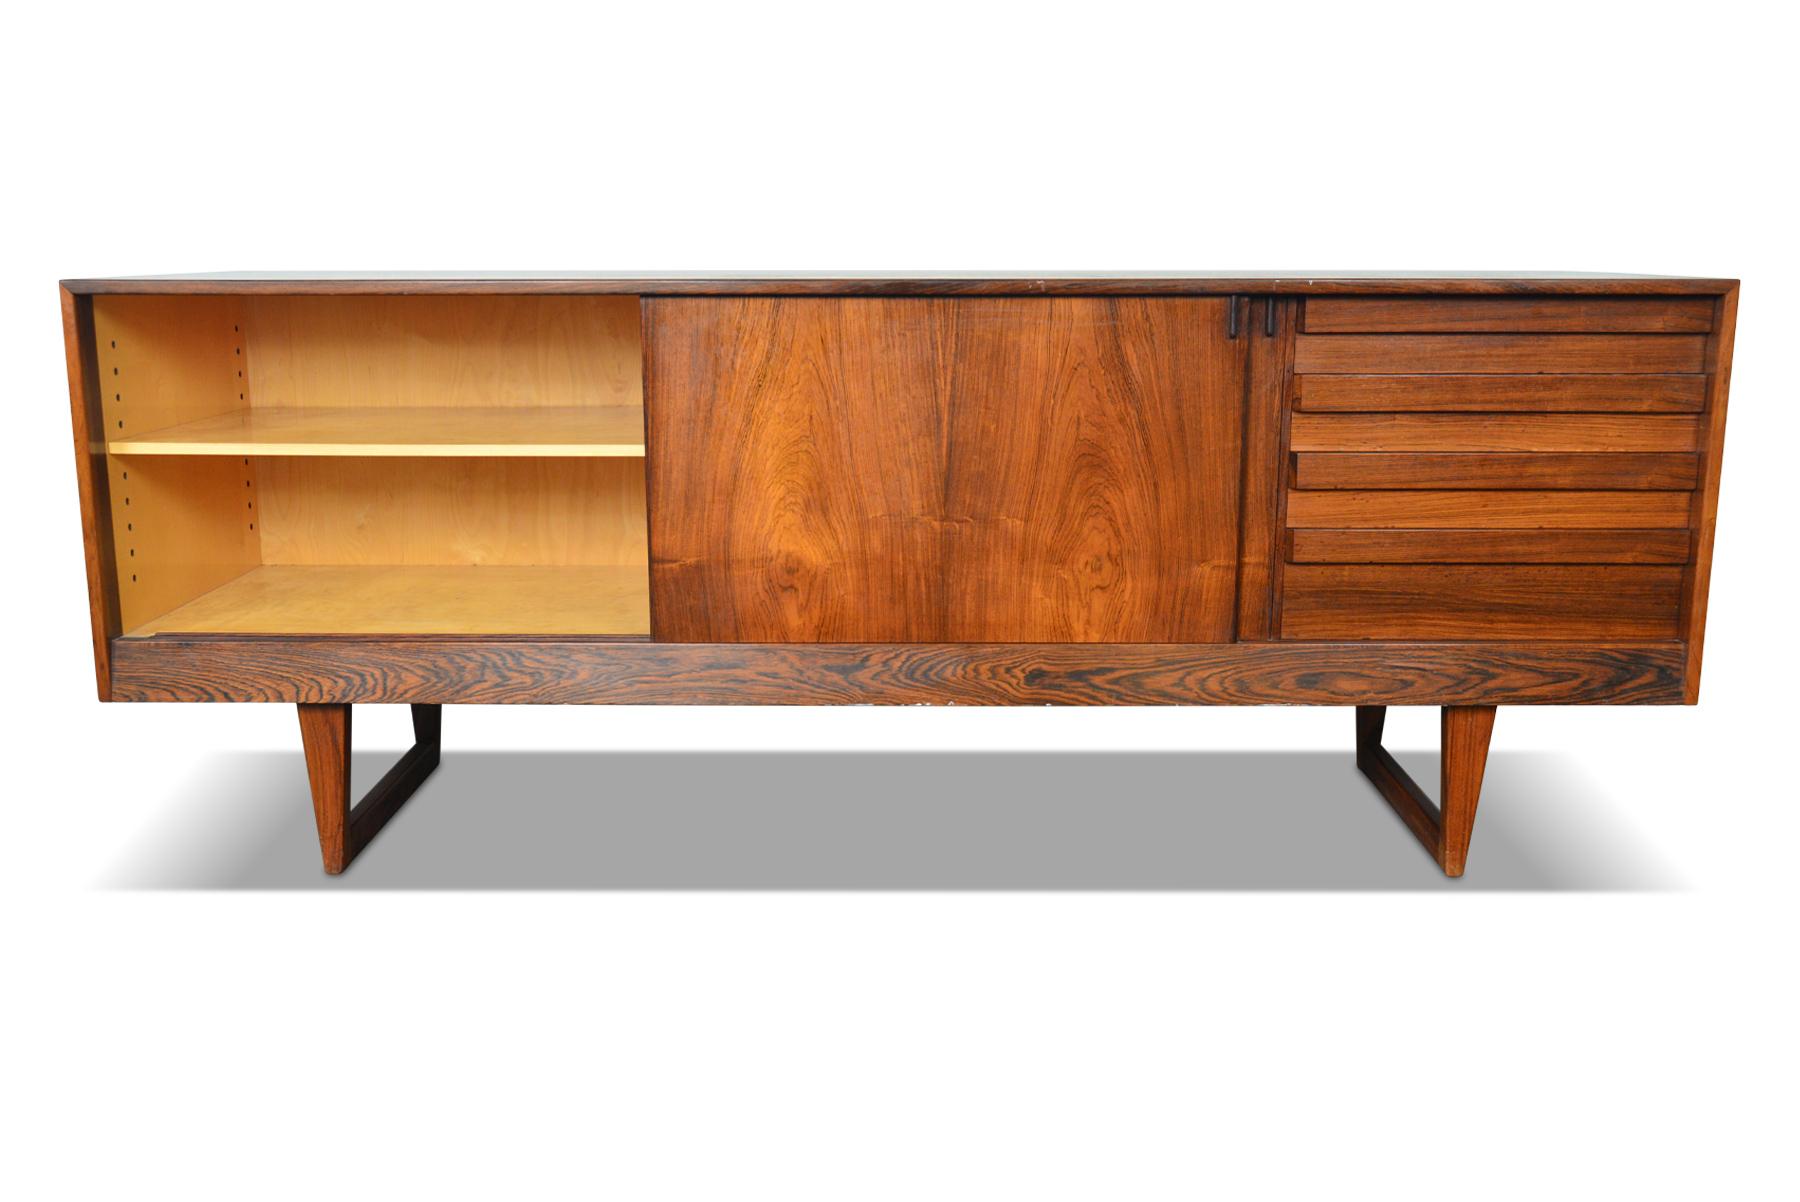 Origin: Denmark
Designer: Kurt Østervig
Manufacturer: KP Mobler.
Era: 1960s.
Materials: Rosewood.
Measurements: 83 wide x 21.5 deep x 31.5 tall.

Condition: In excellent original condition with typical wear for its vintage. Price includes a